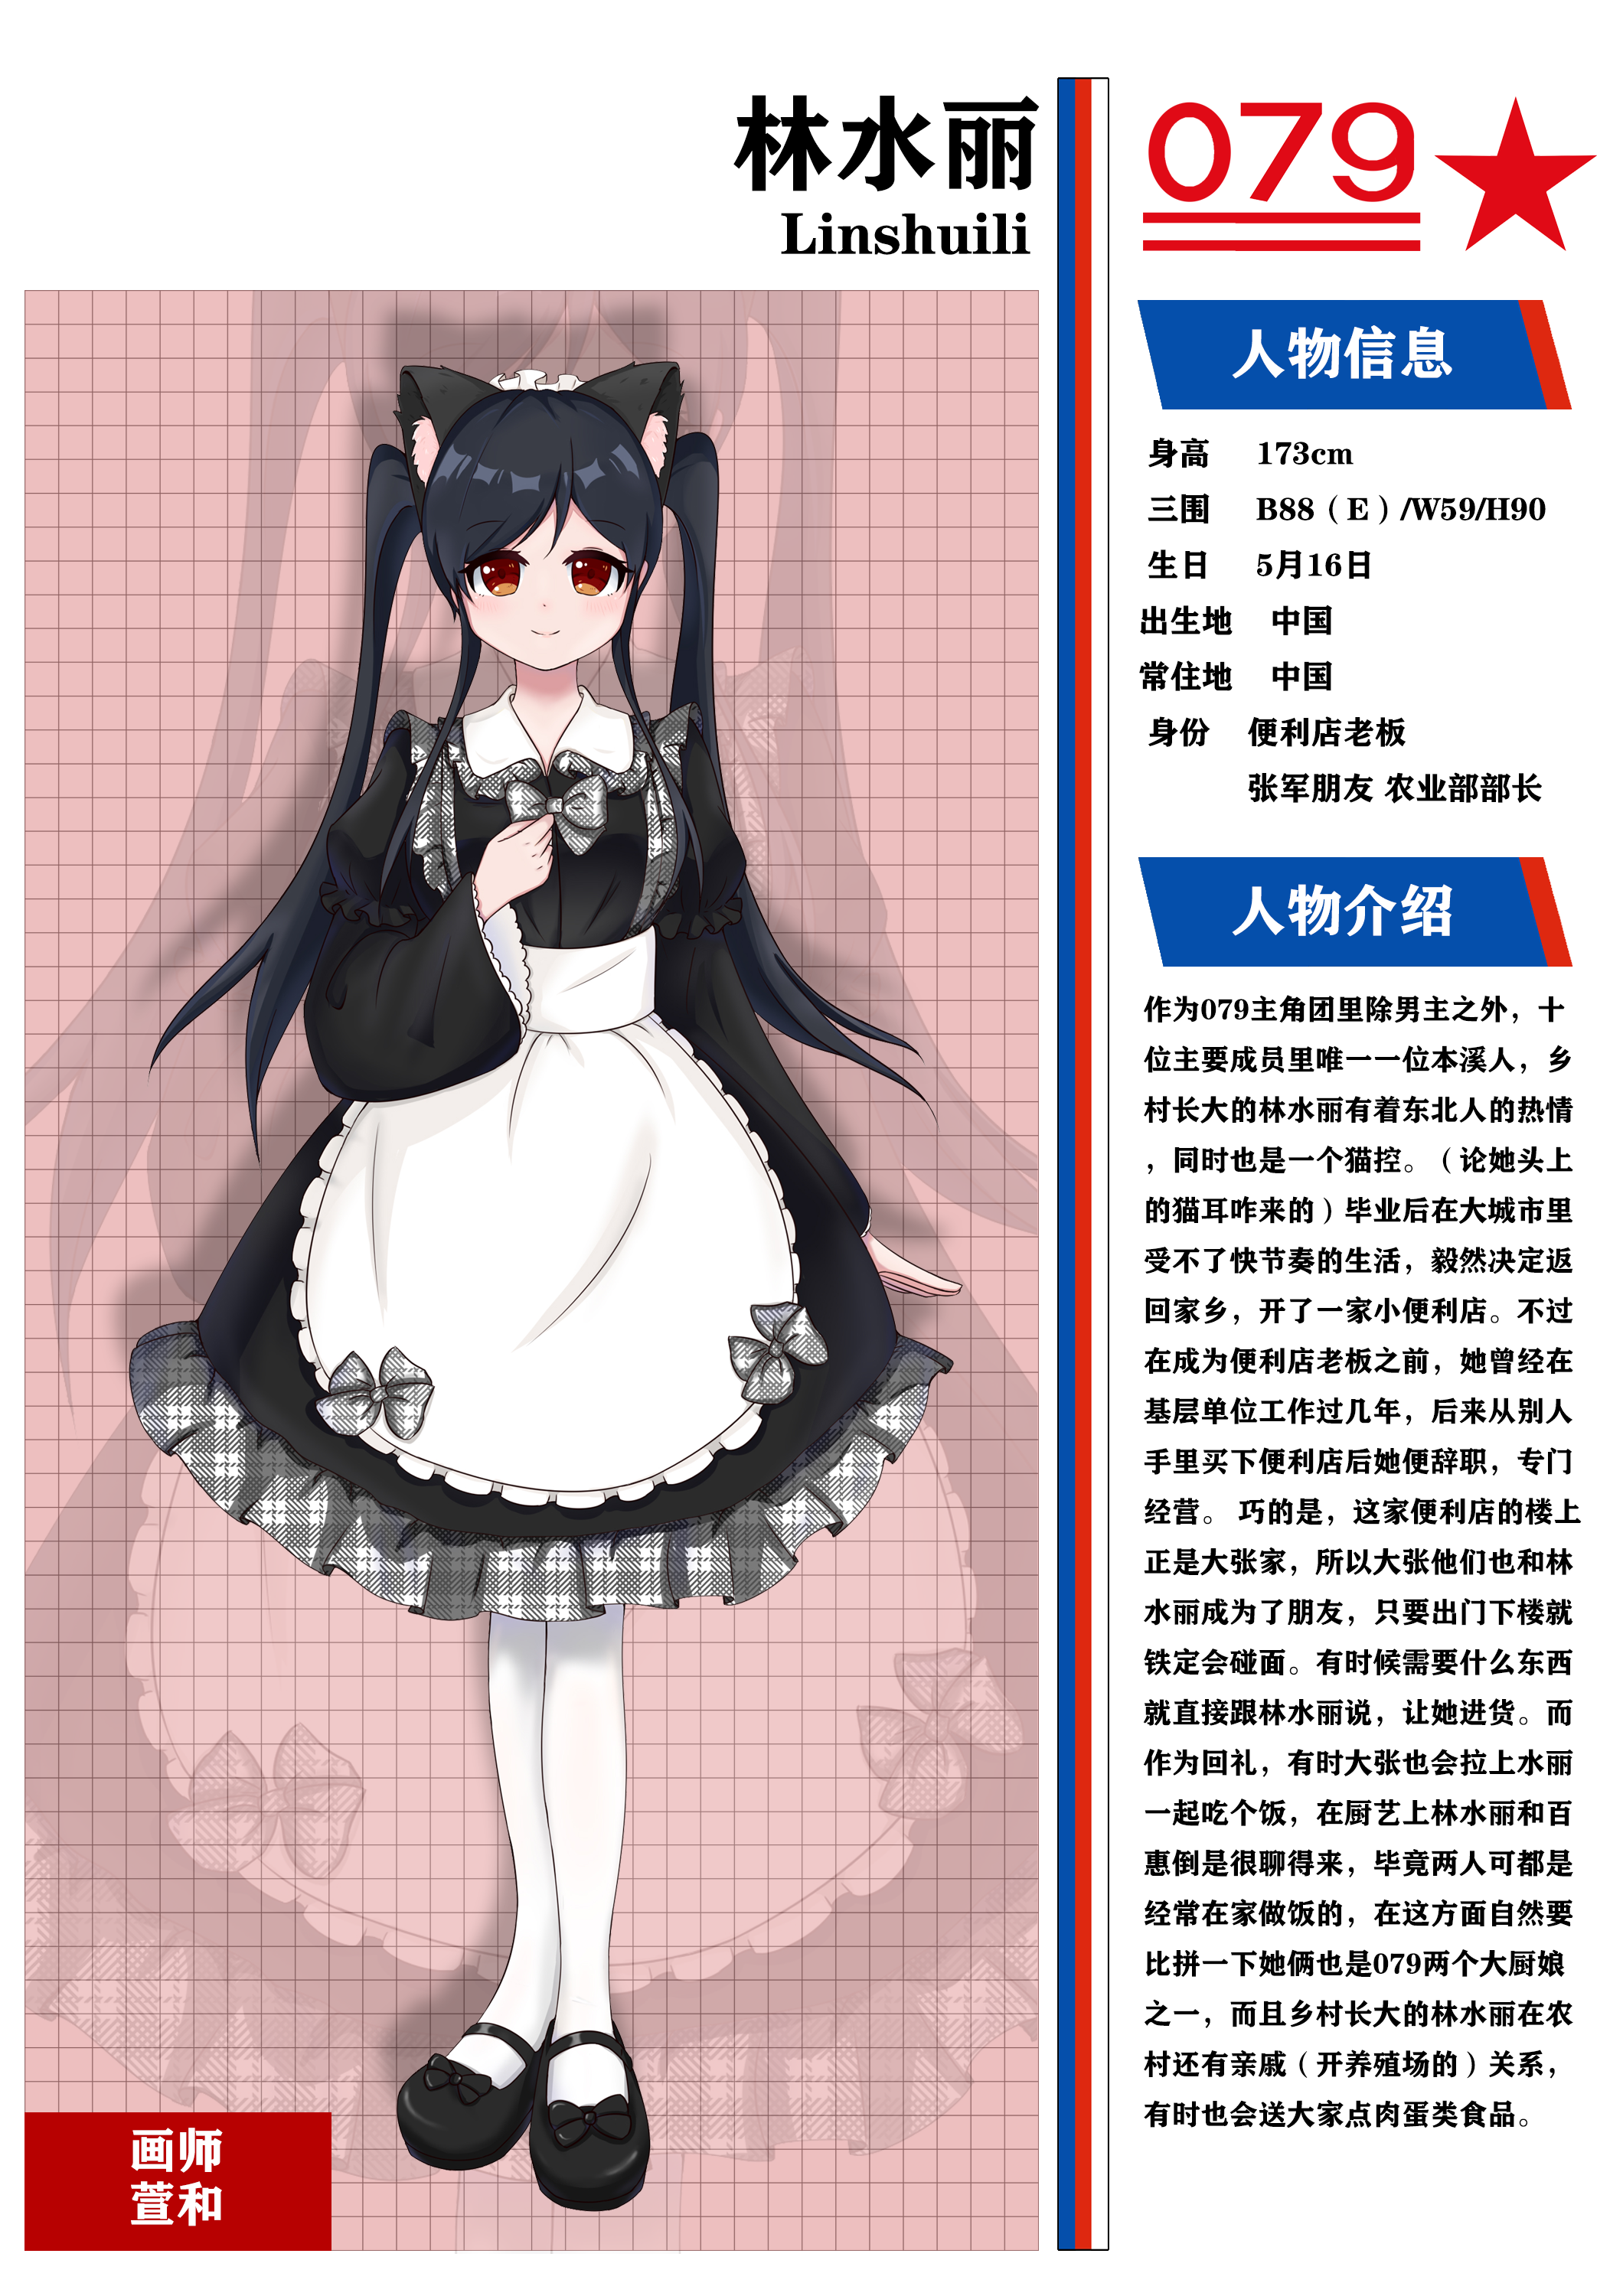 079Project 林水麗 介紹模板.png